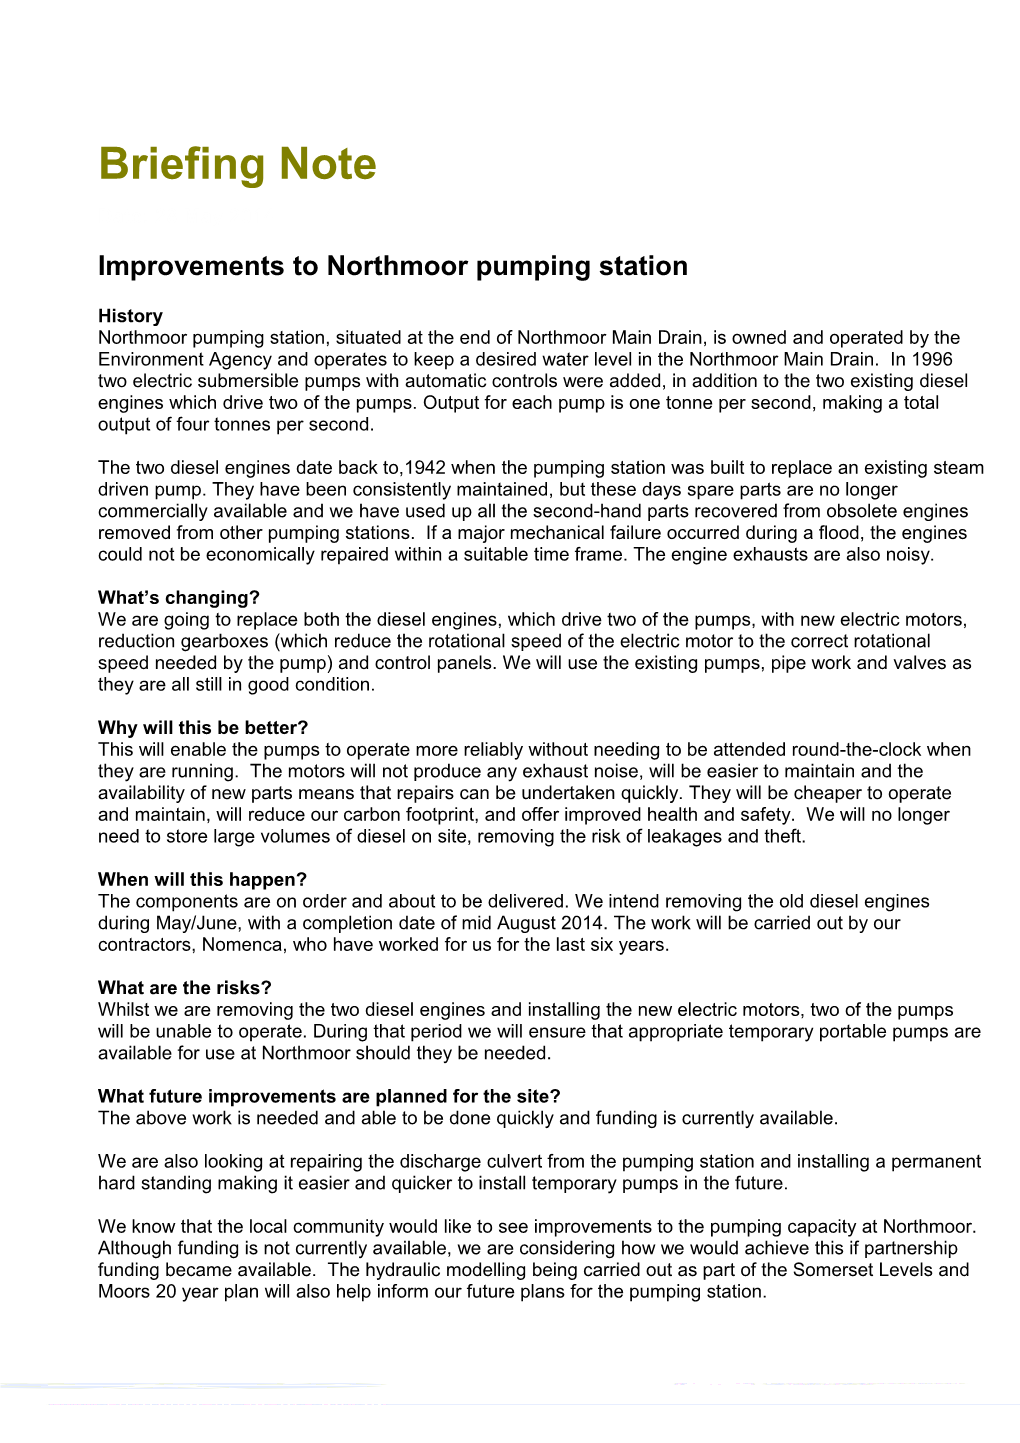 Improvements to Northmoor Pumping Station